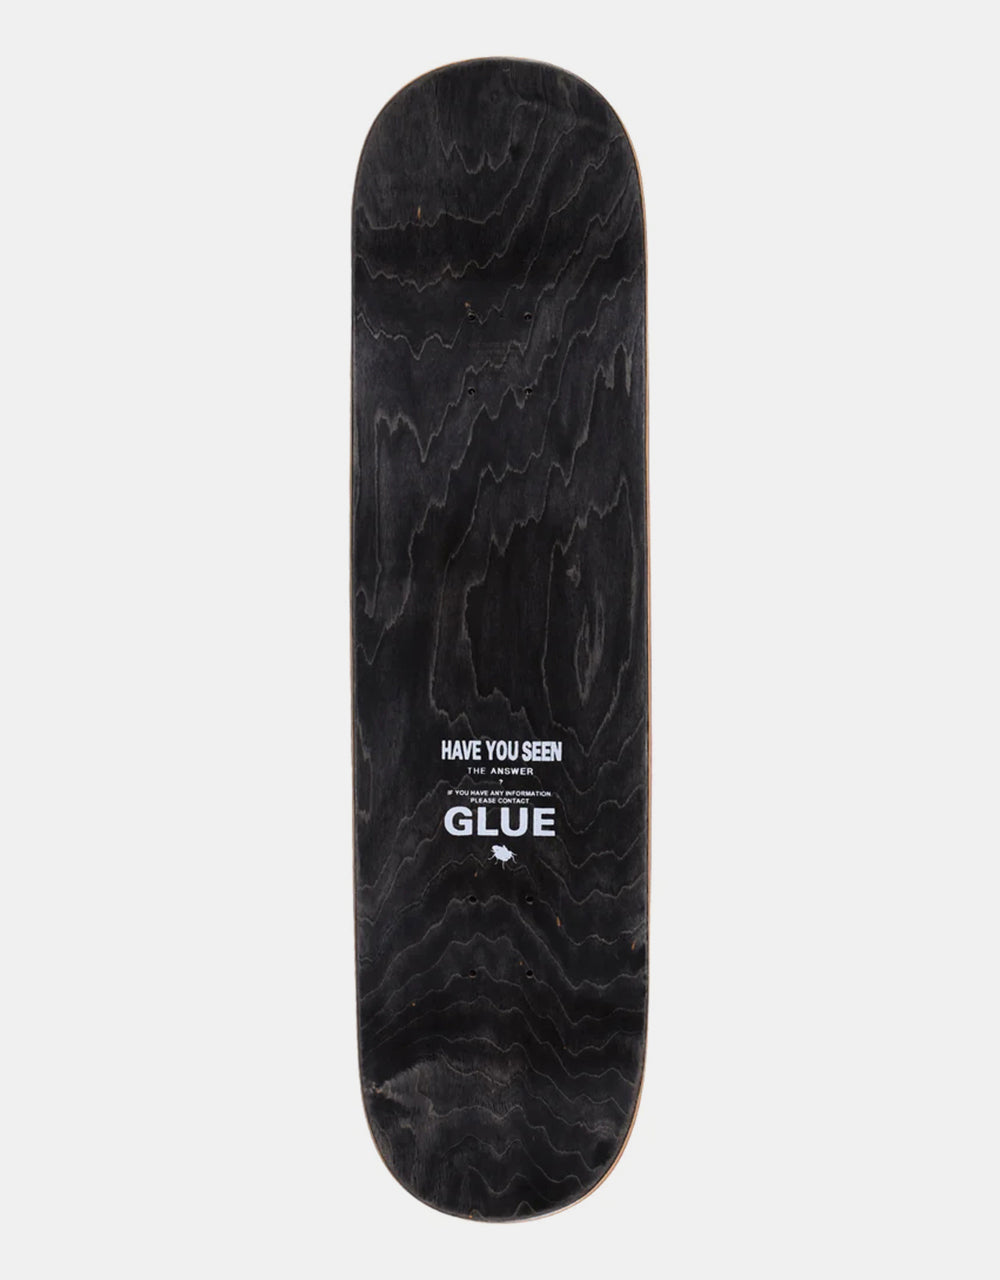 Glue Cryptic Coloration Skateboard Deck - 8.625"